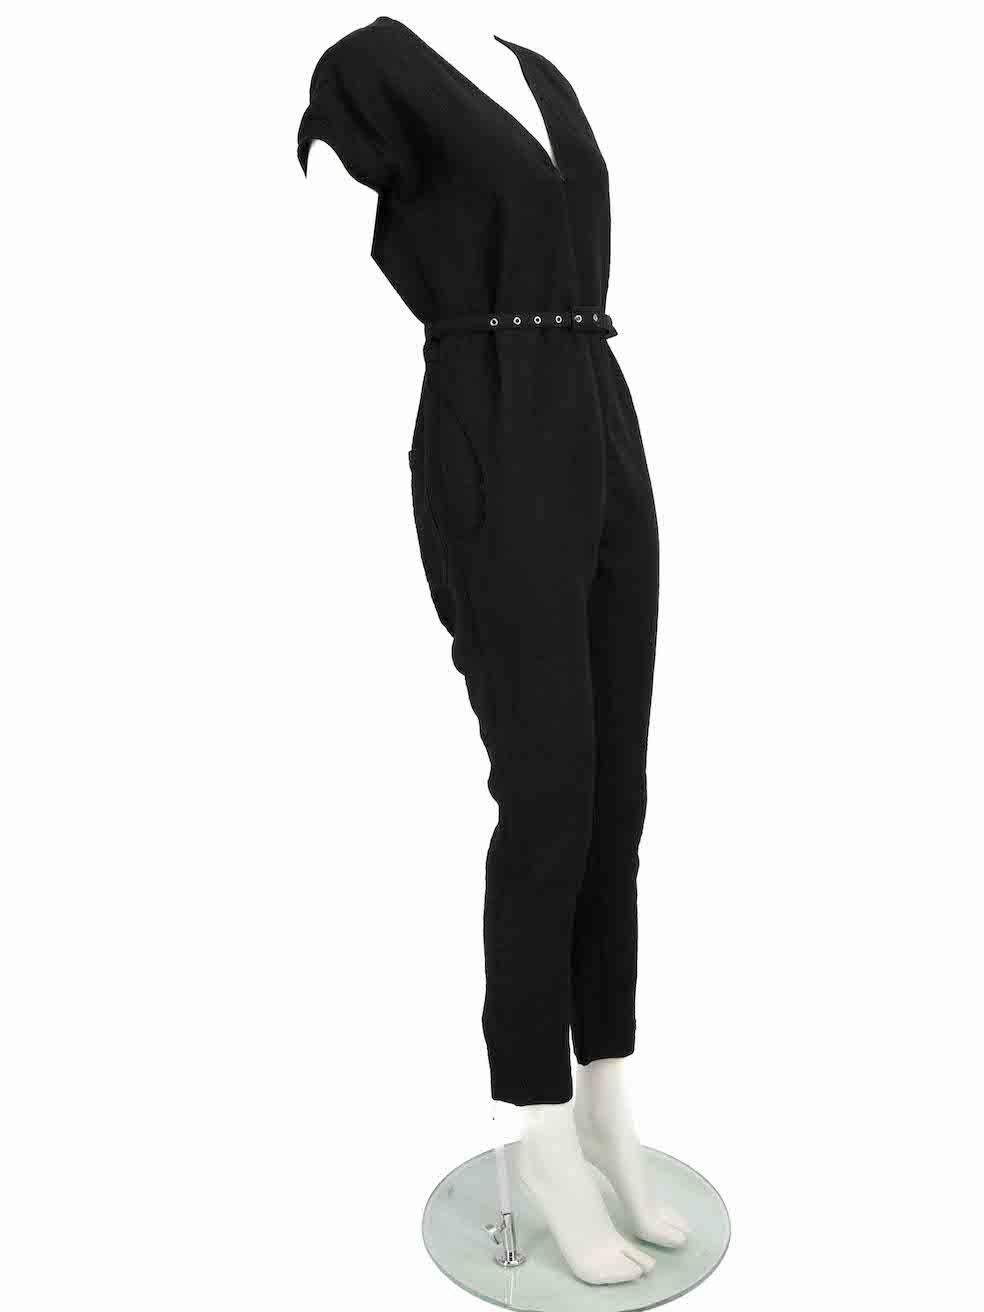 CONDITION is Very good. Hardly any visible wear to jumpsuit is evident on this used Rachel Comey designer resale item.
 
 Details
 Black
 Cotton
 Jumpsuit
 Slim leg
 V-neck
 Front zip fastening
 Belted
 Short sleeves
 2x Side pockets
 
 
 Made in